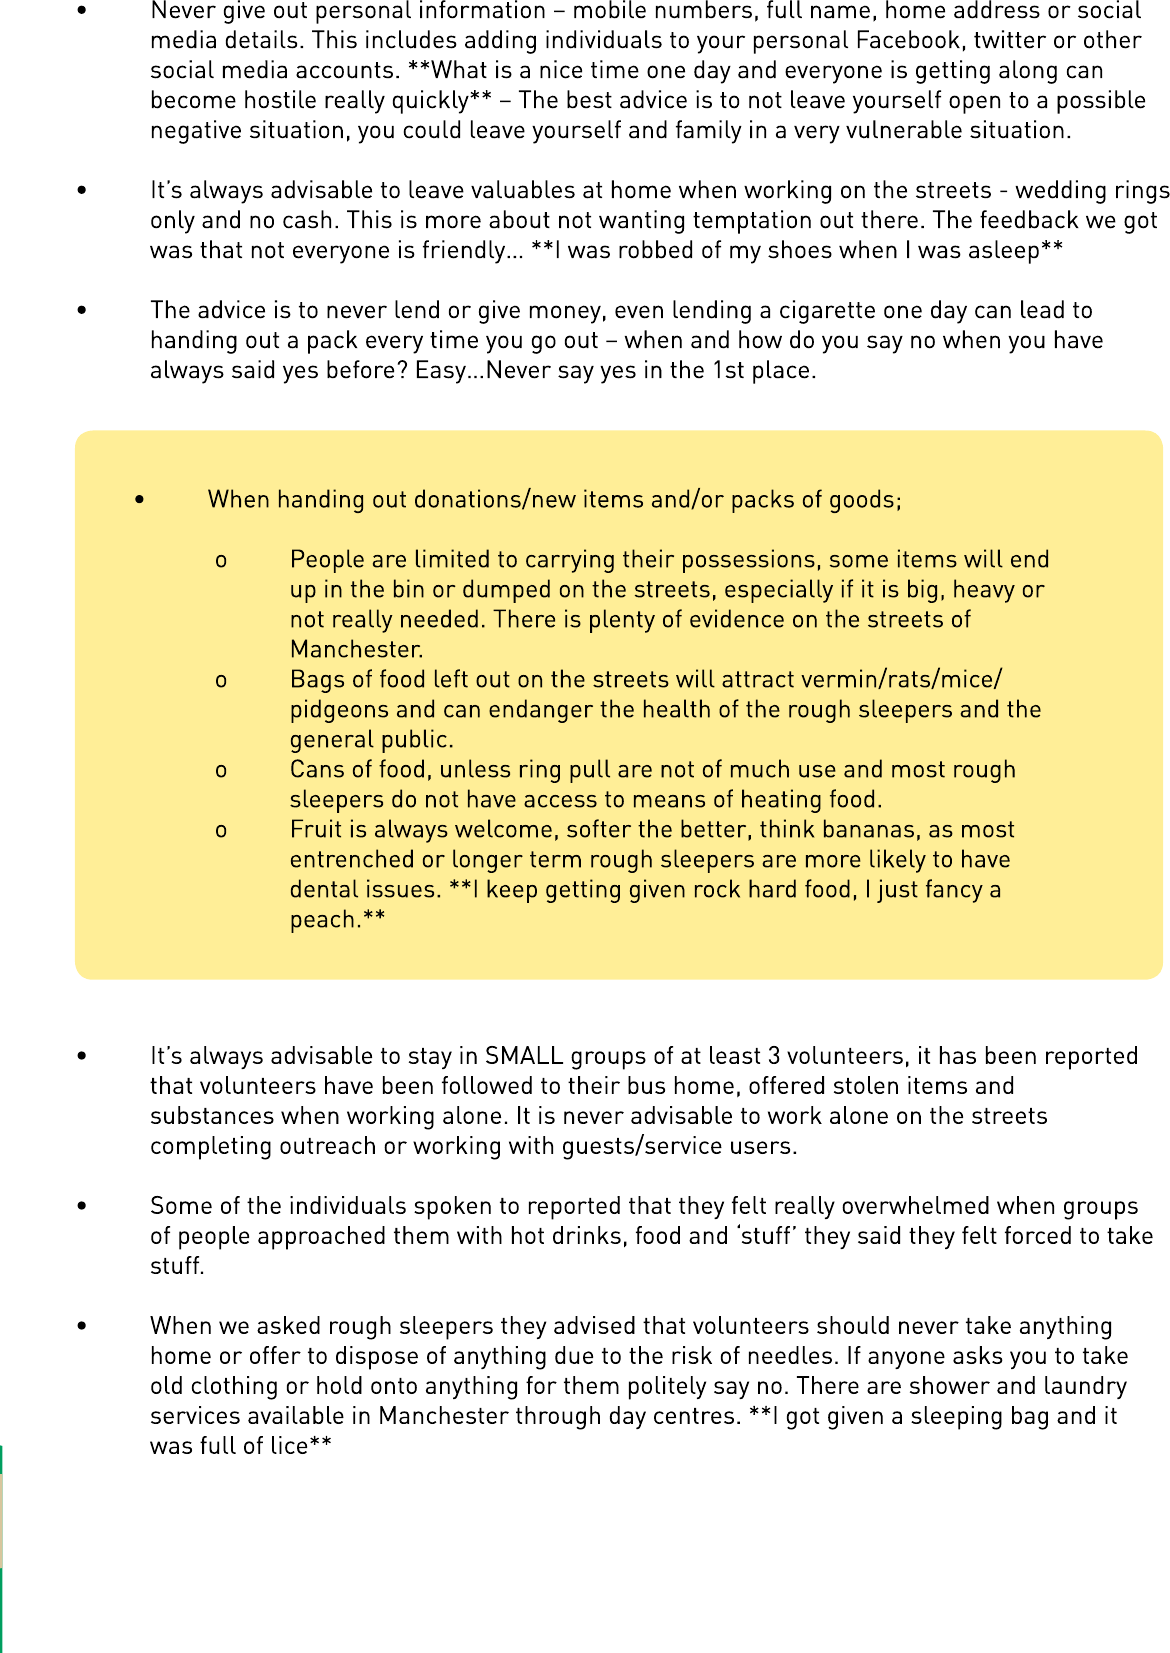 Page 5 of 9 - Best-Practice-Guide-V4.1